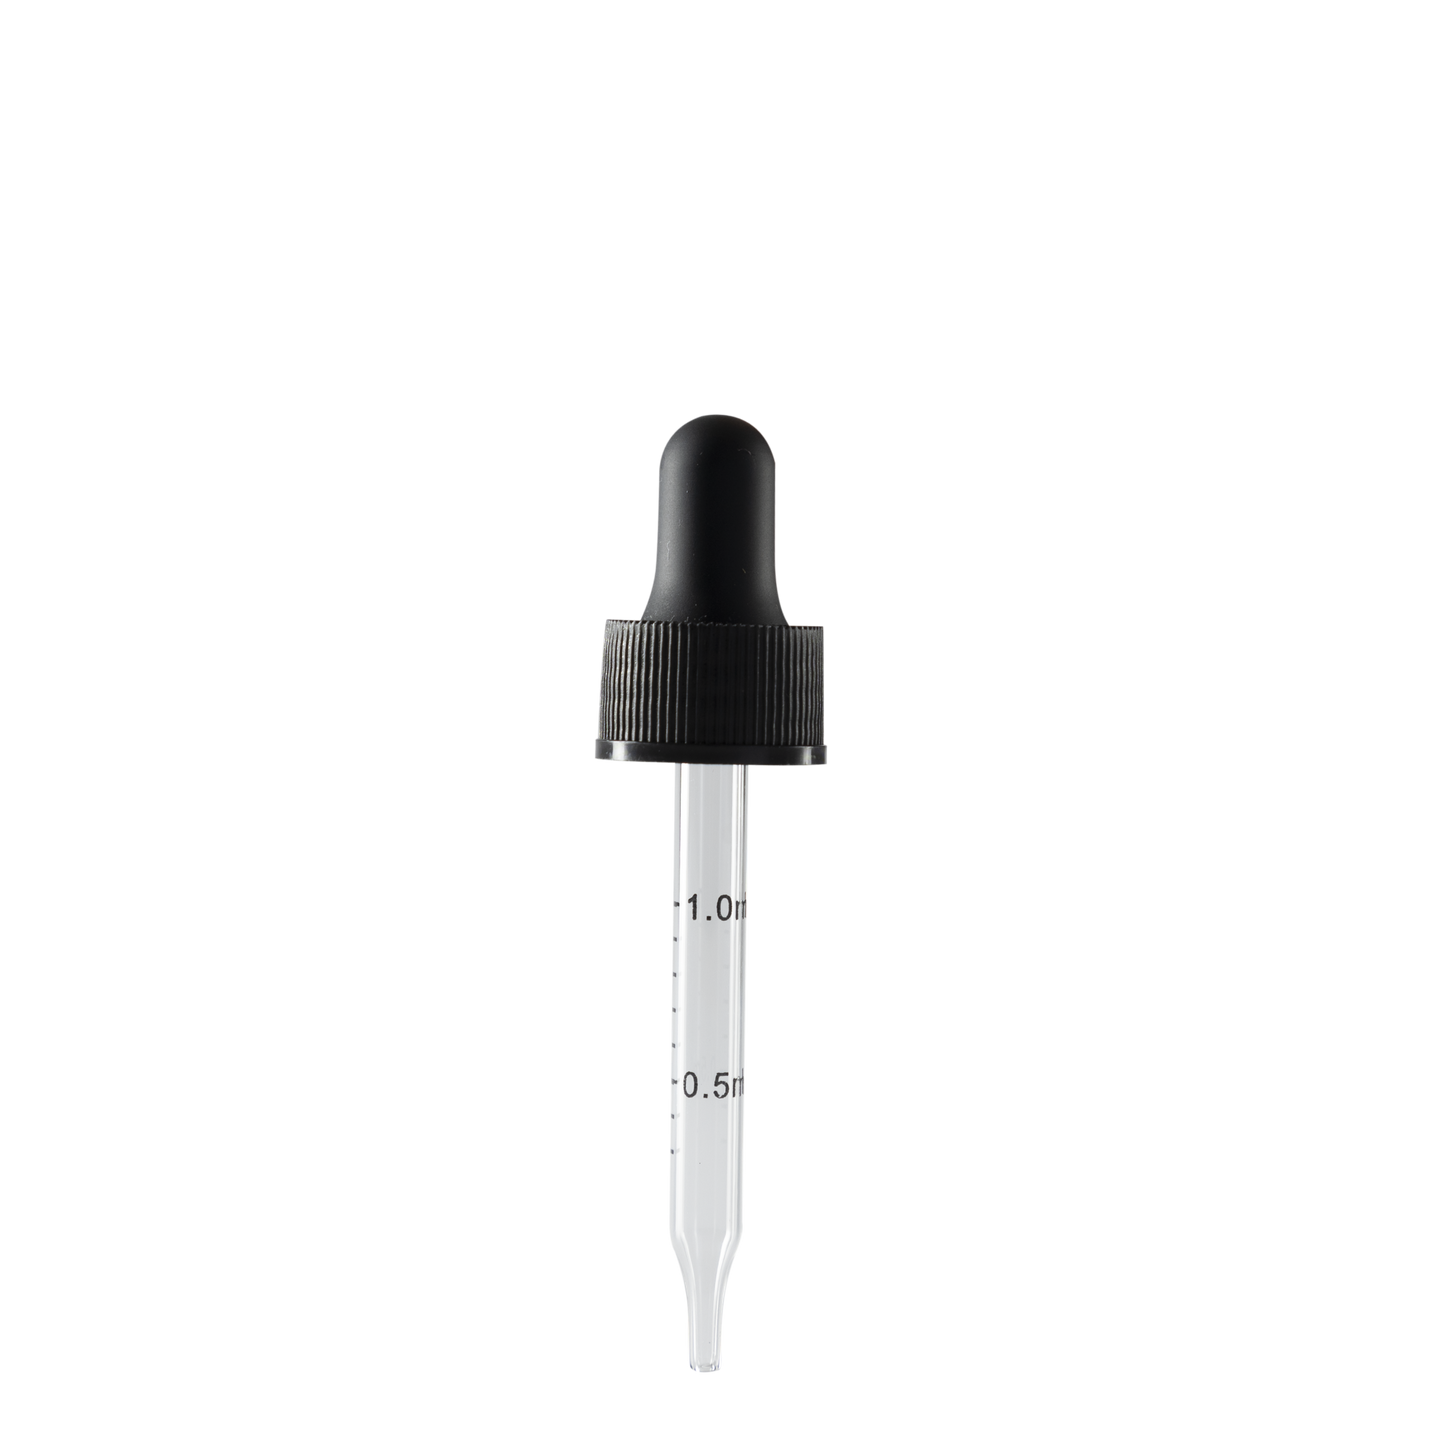 1 oz black glass dropper include a glass pipette that can be used for measuring medications or adding small amounts of liquids to a recipe.